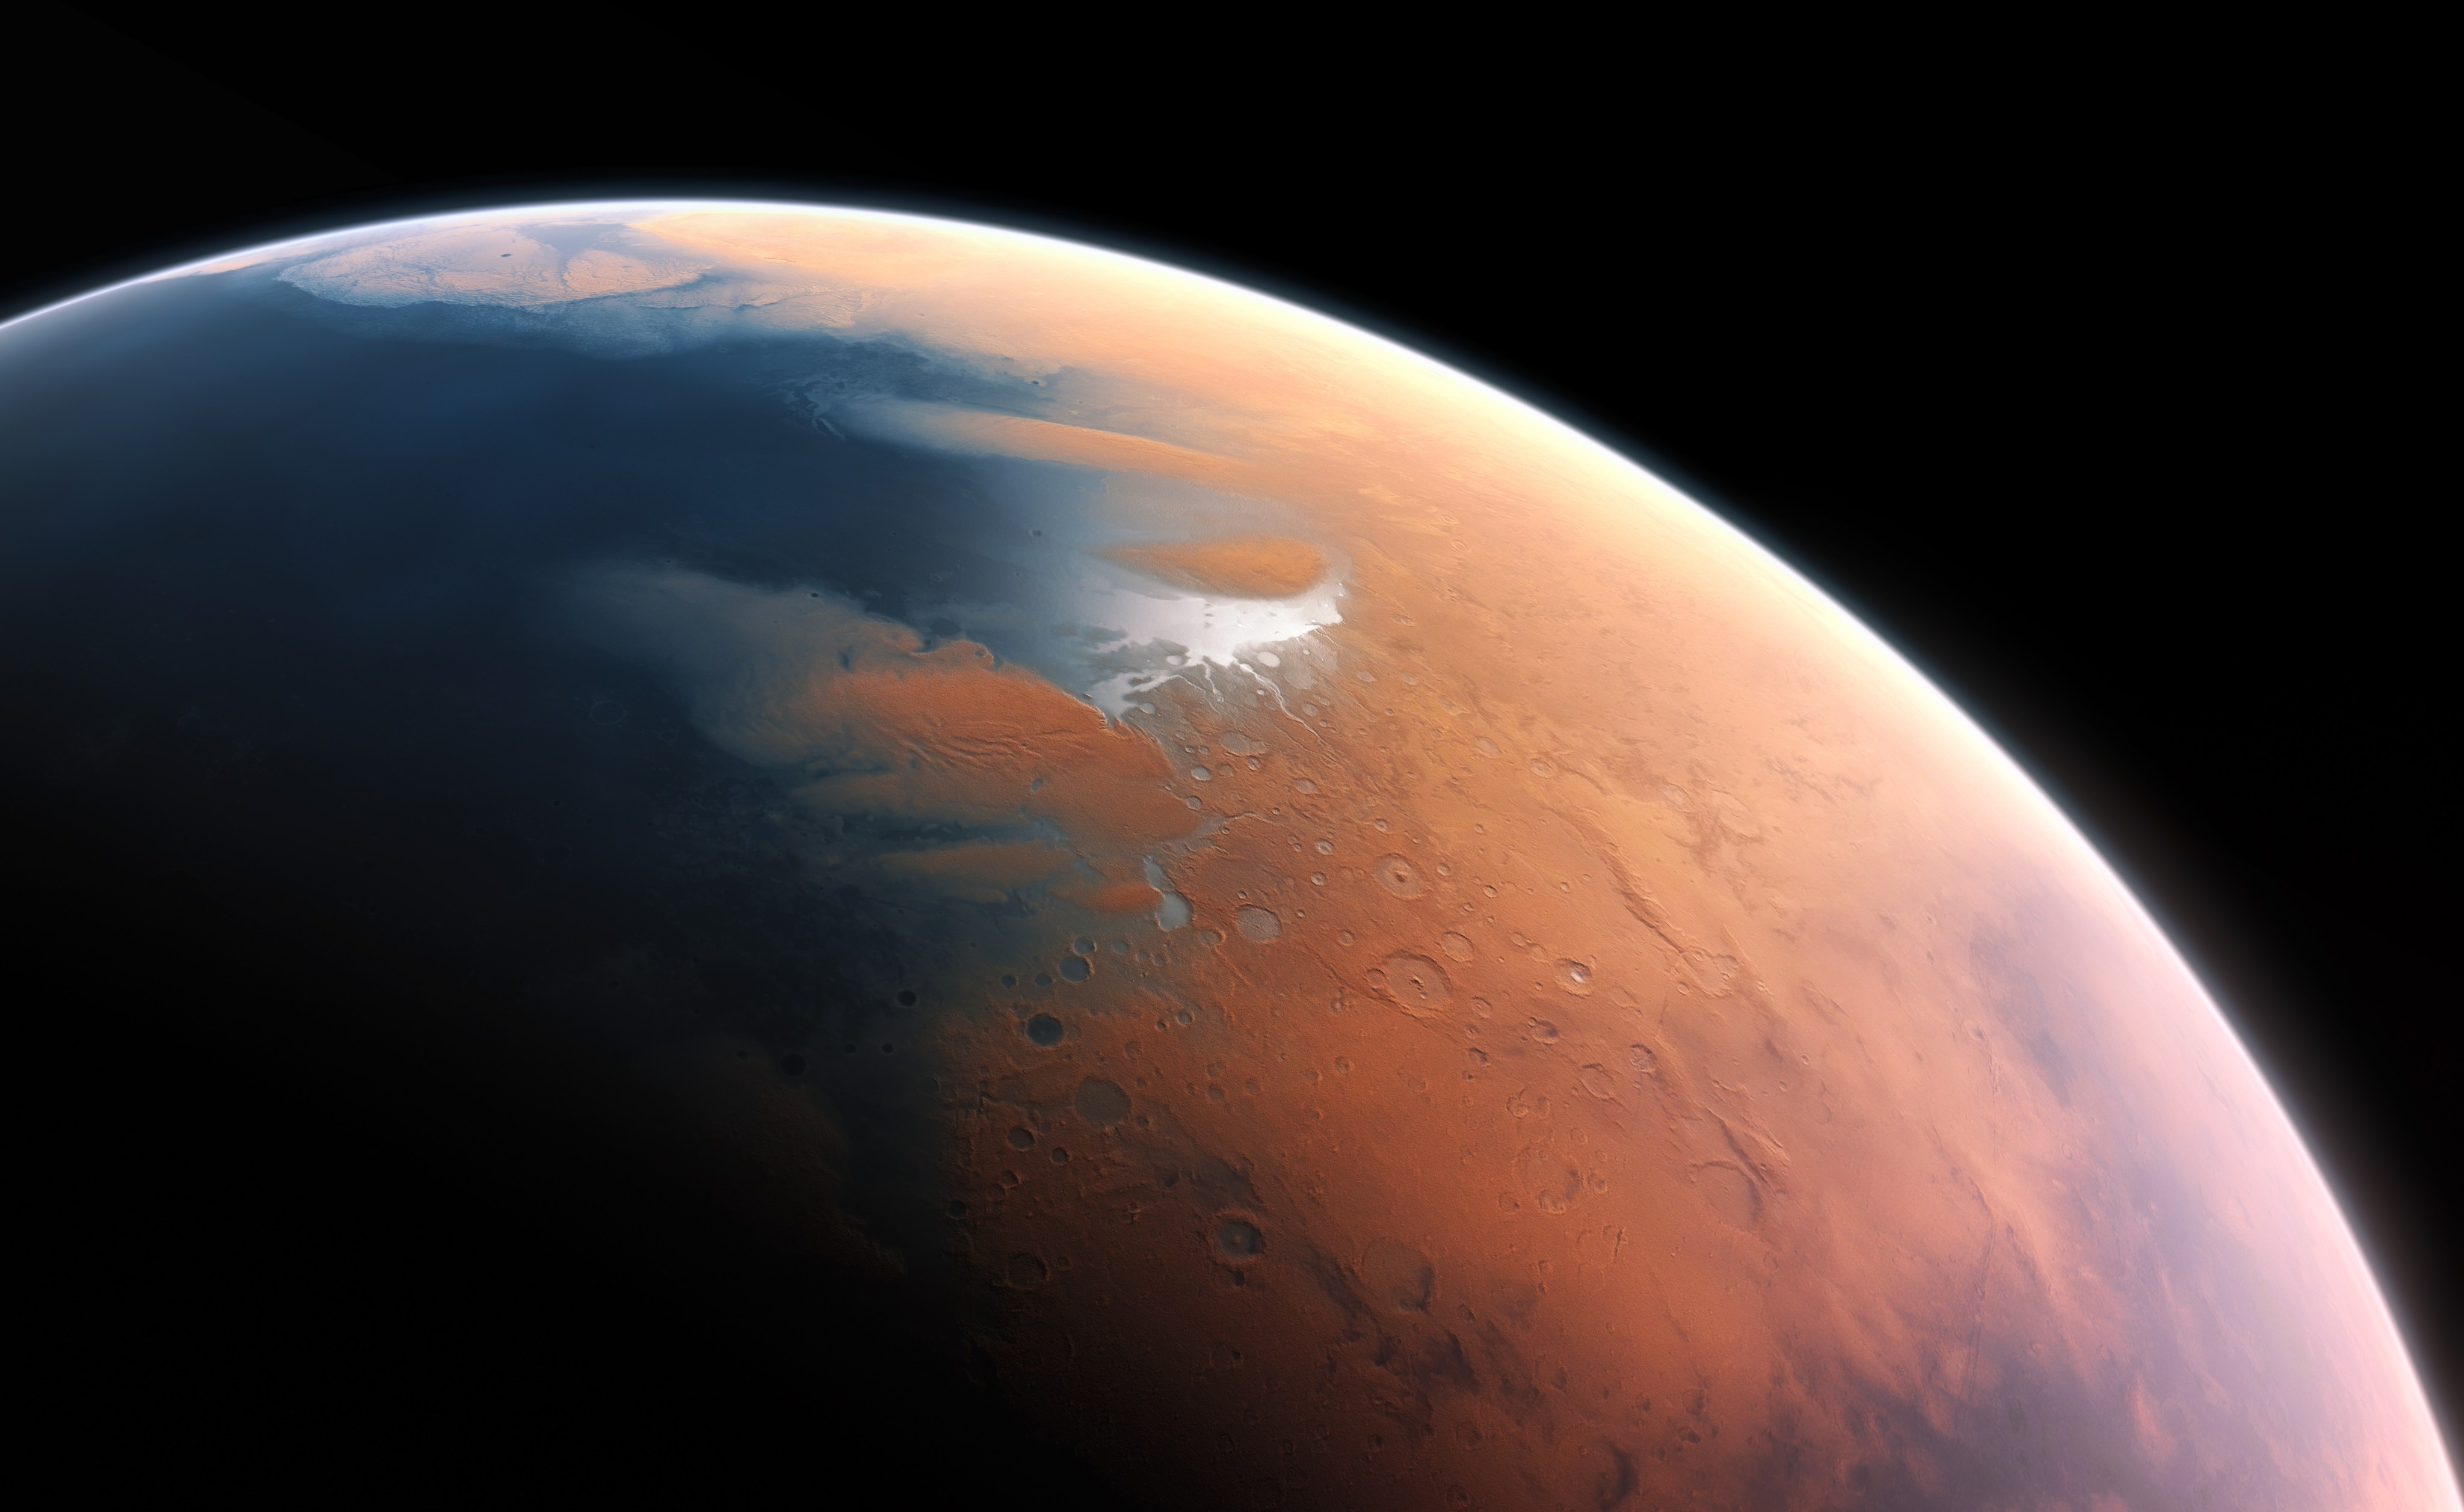 An illustration of Mars as it might have appears with water on its surface, shows the Red Planet with areas of blue water, with Sun glinting off the liquid's surface.